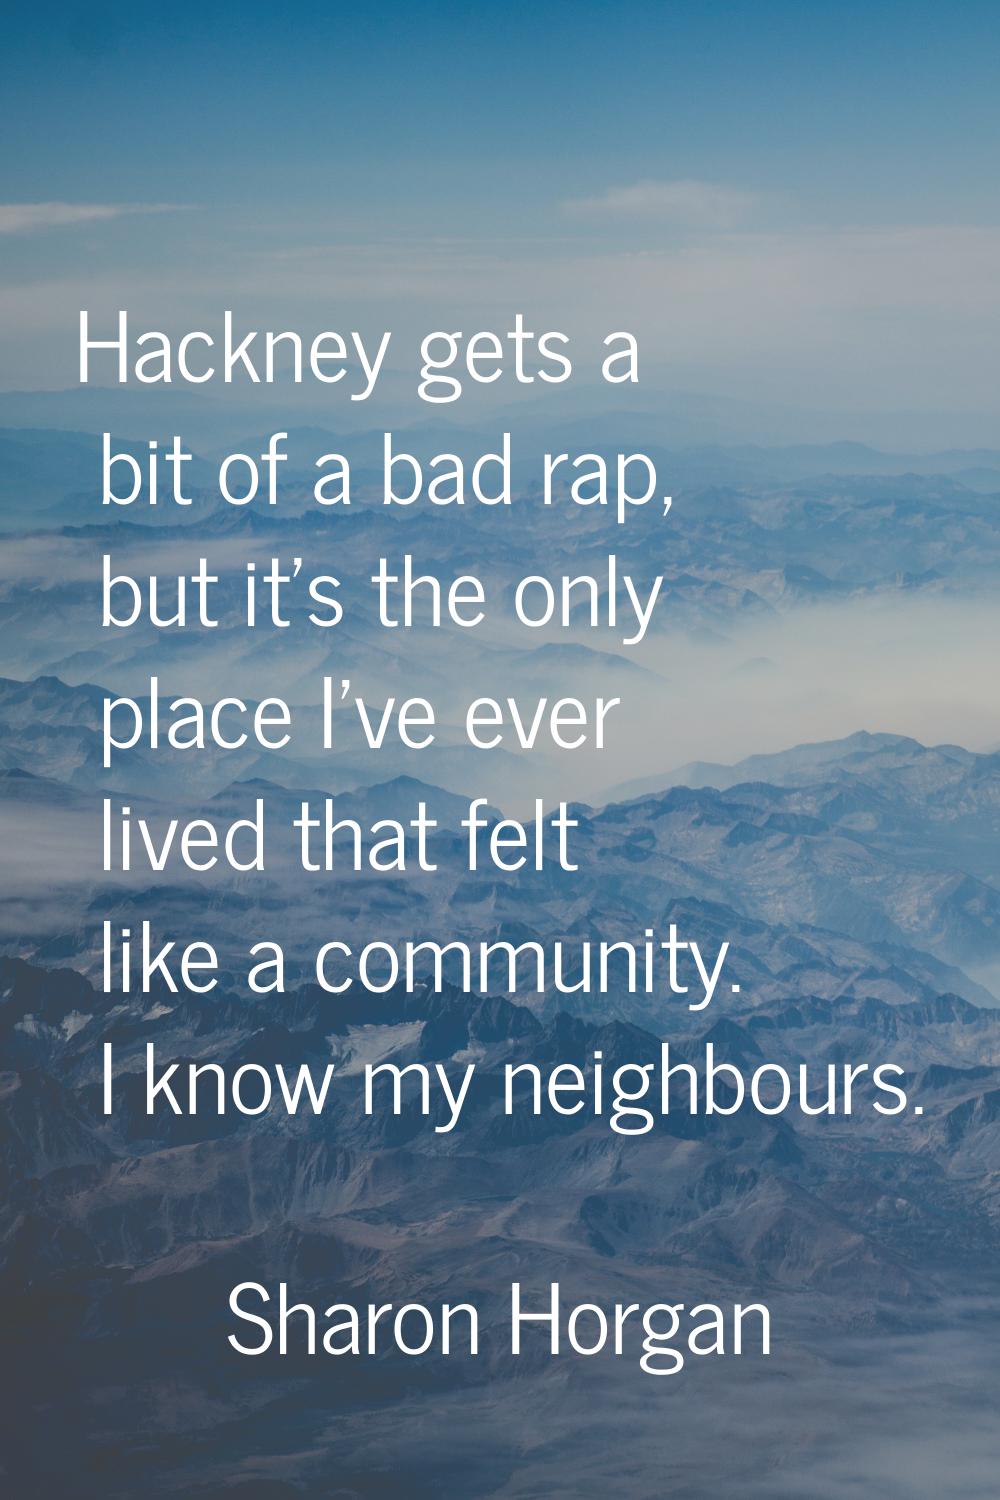 Hackney gets a bit of a bad rap, but it's the only place I've ever lived that felt like a community